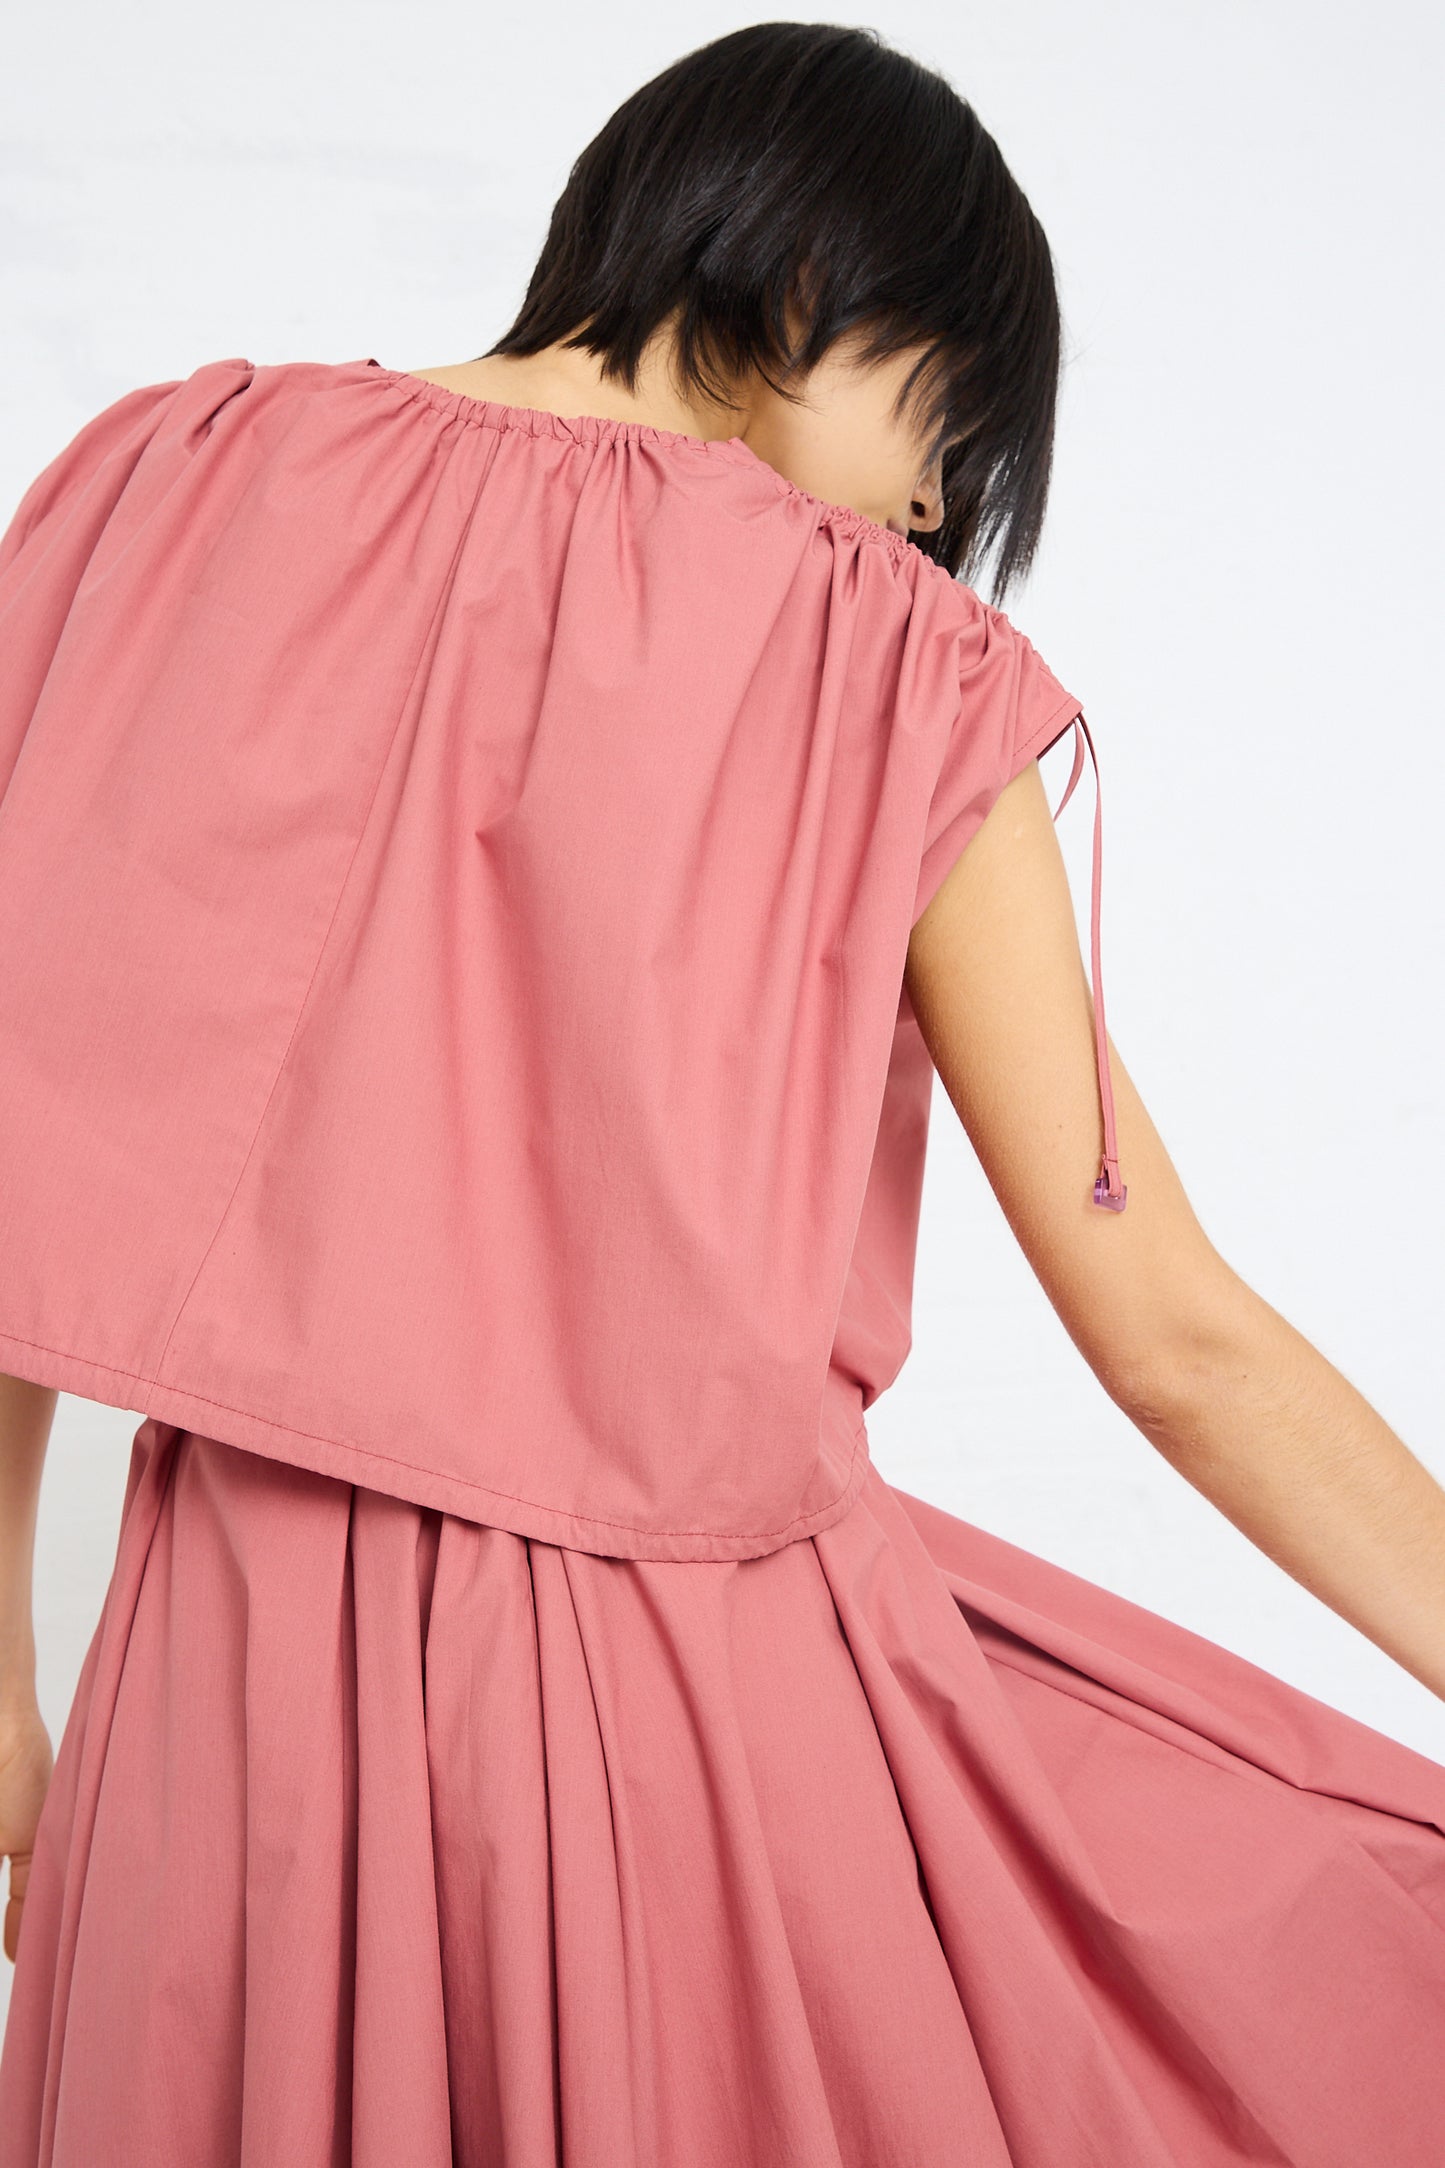 Woman in a pink dress with a Cotton Poplin Gathered Top in Canyon by Veronique Leroy and an adjustable ruche detail.